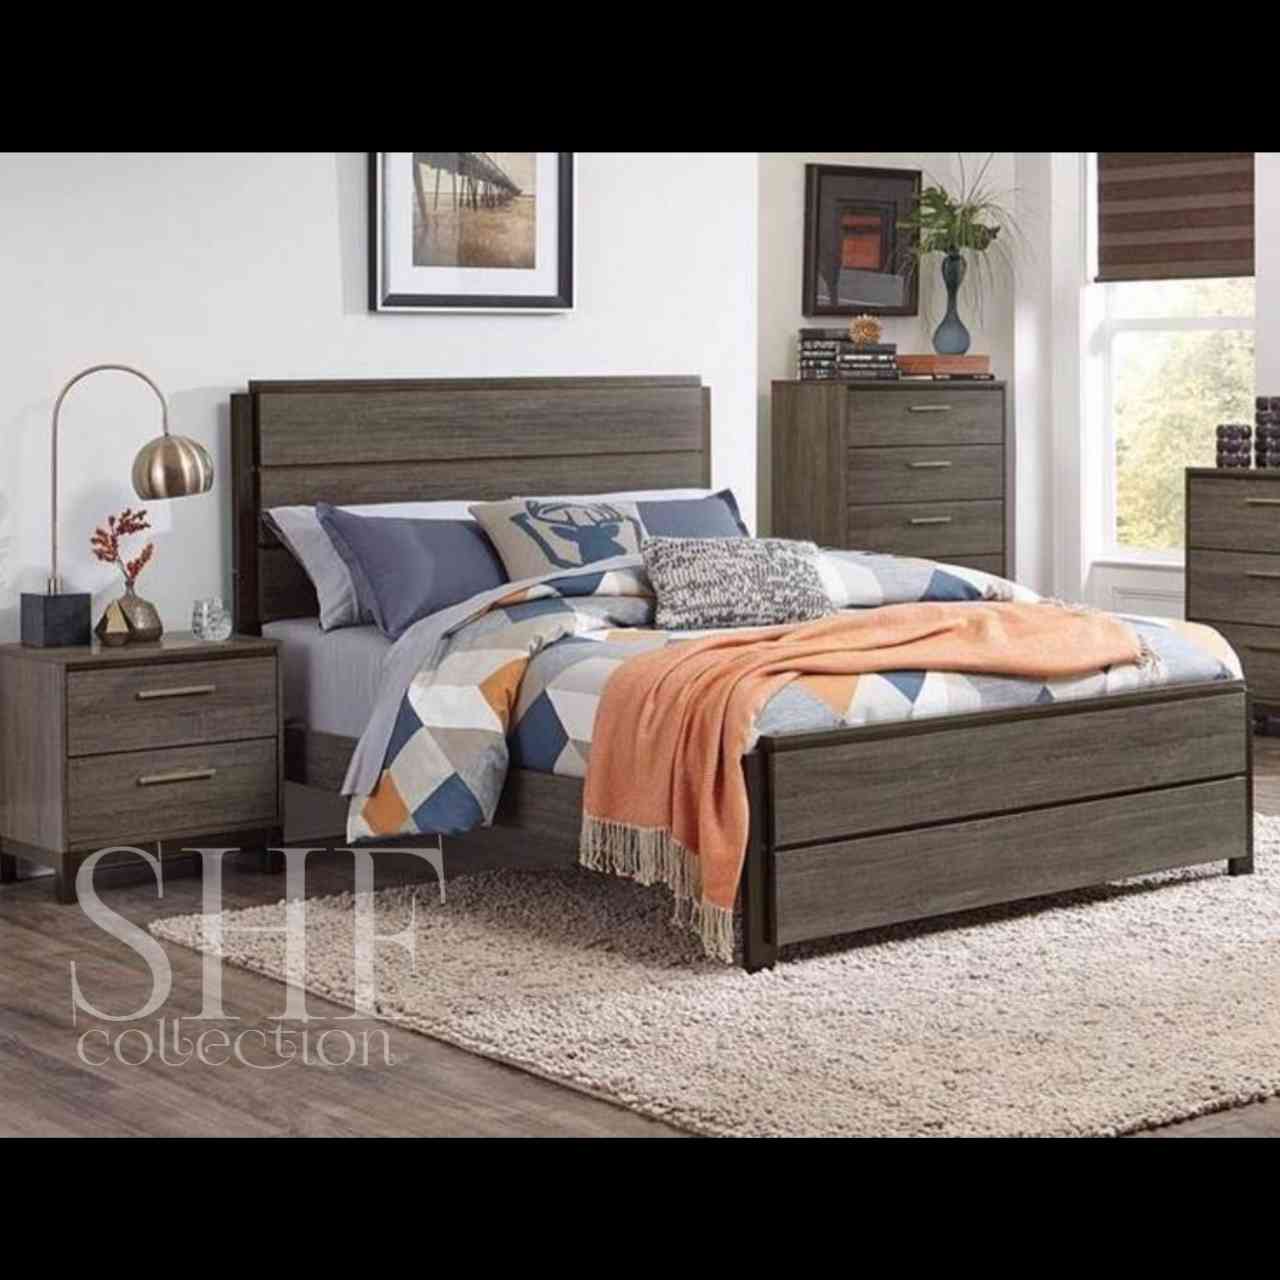 SHF-361 Ash Wood Simple Bed Set In Mat Finish - SHF Collection